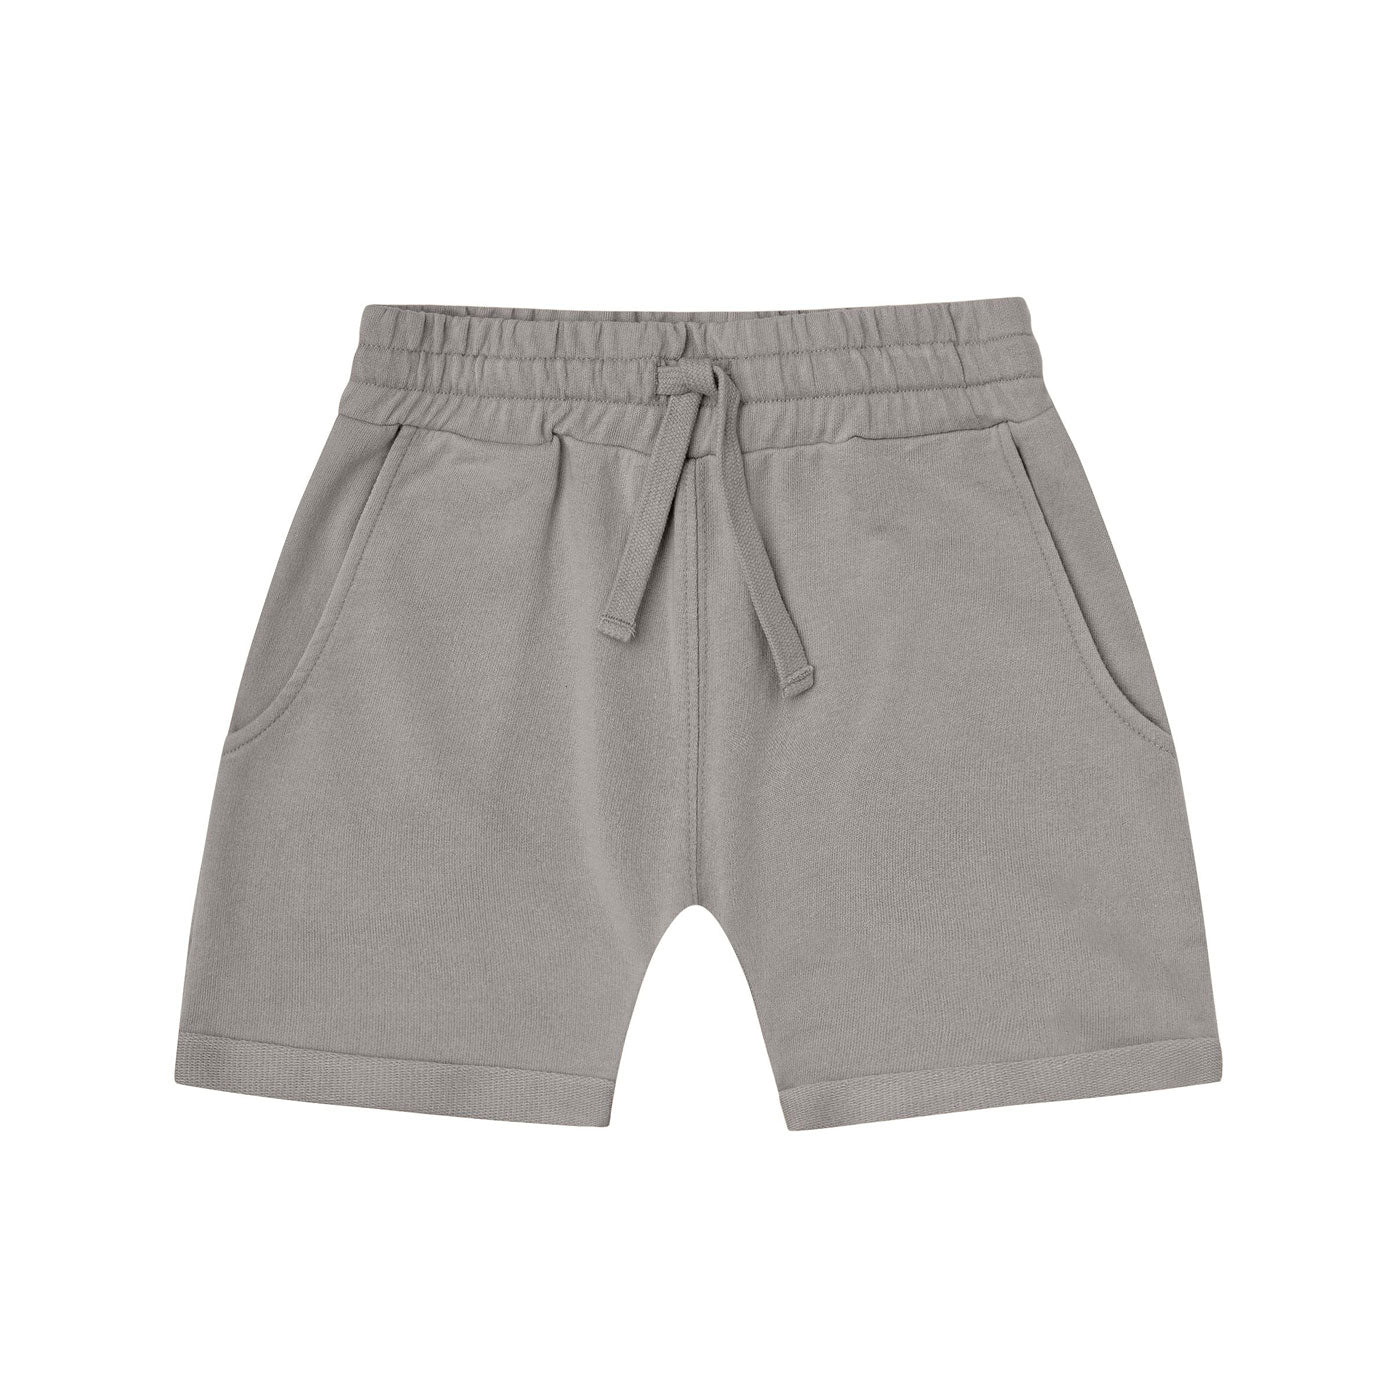 Rylee and Cru Relaxed Short - Slate